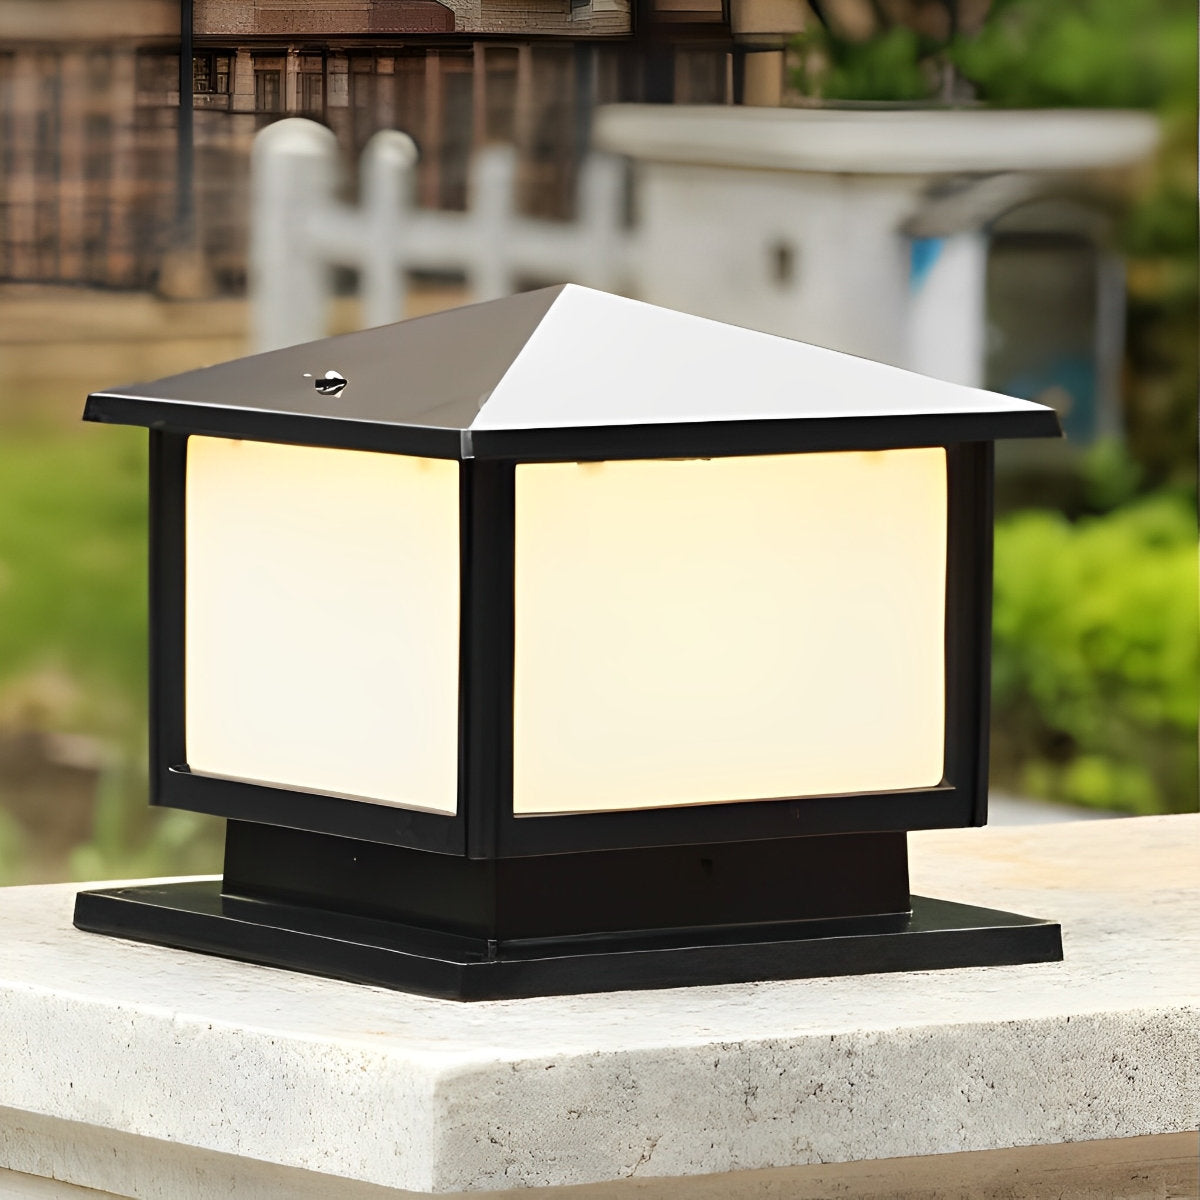 Square Three Step Dimming LED Waterproof Solar Fence Post Lights Column Lamp - Flyachilles